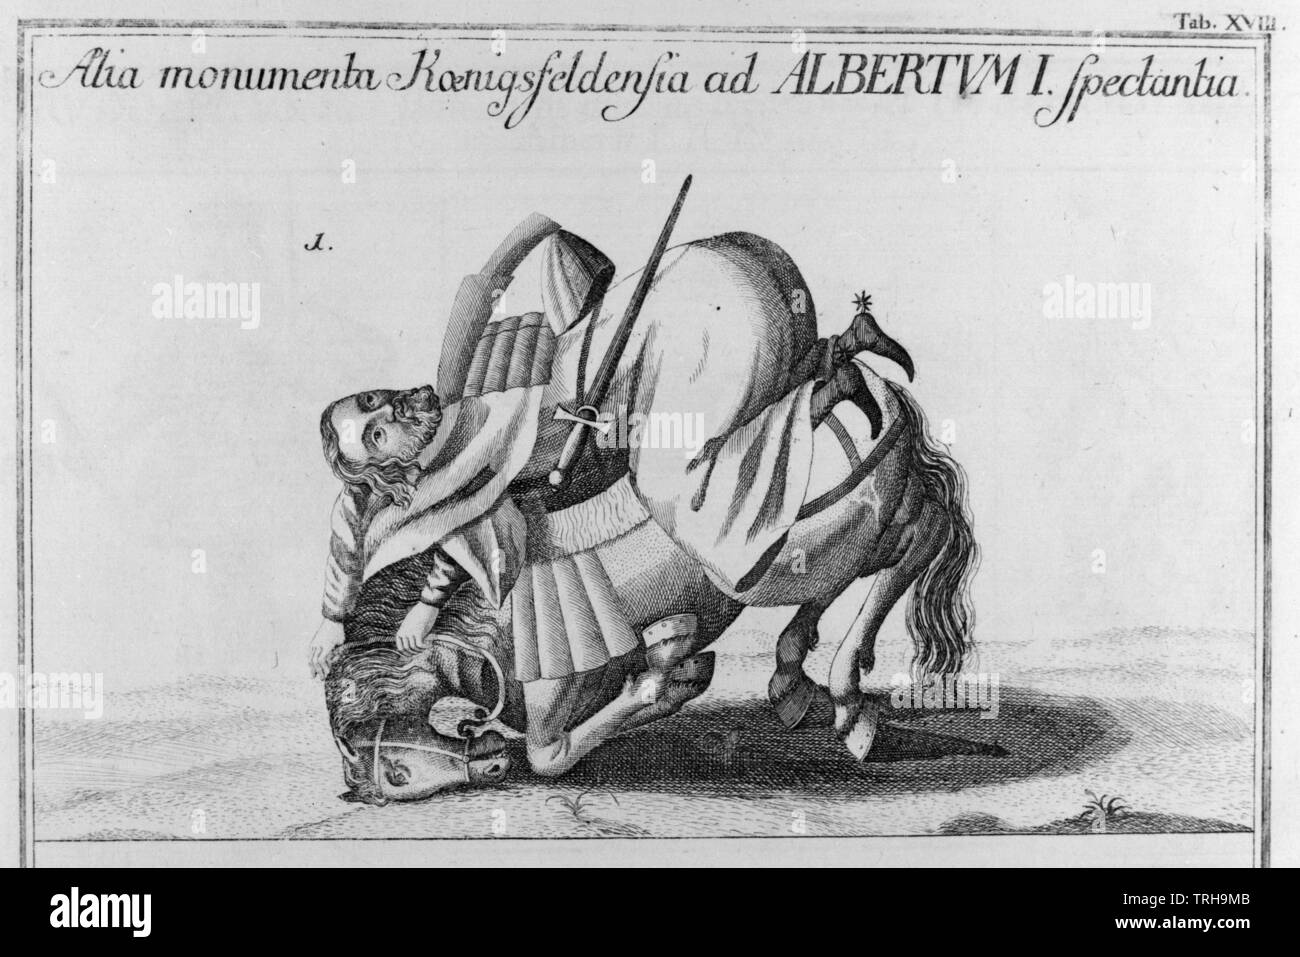 Albrecht I, German king, Albrecht is falling, fatally wounded, with his horse, engraving based on own drawing by Johann Baptist Haas, go back on an template in the Monastery of Koenigsfelden. in: Marquard crucifix: Pinacotheca principum Austria etc. Paris prior, edited by secunda.- St. Blaise in the Black Forest 1773, Additional-Rights-Clearance-Info-Not-Available Stock Photo